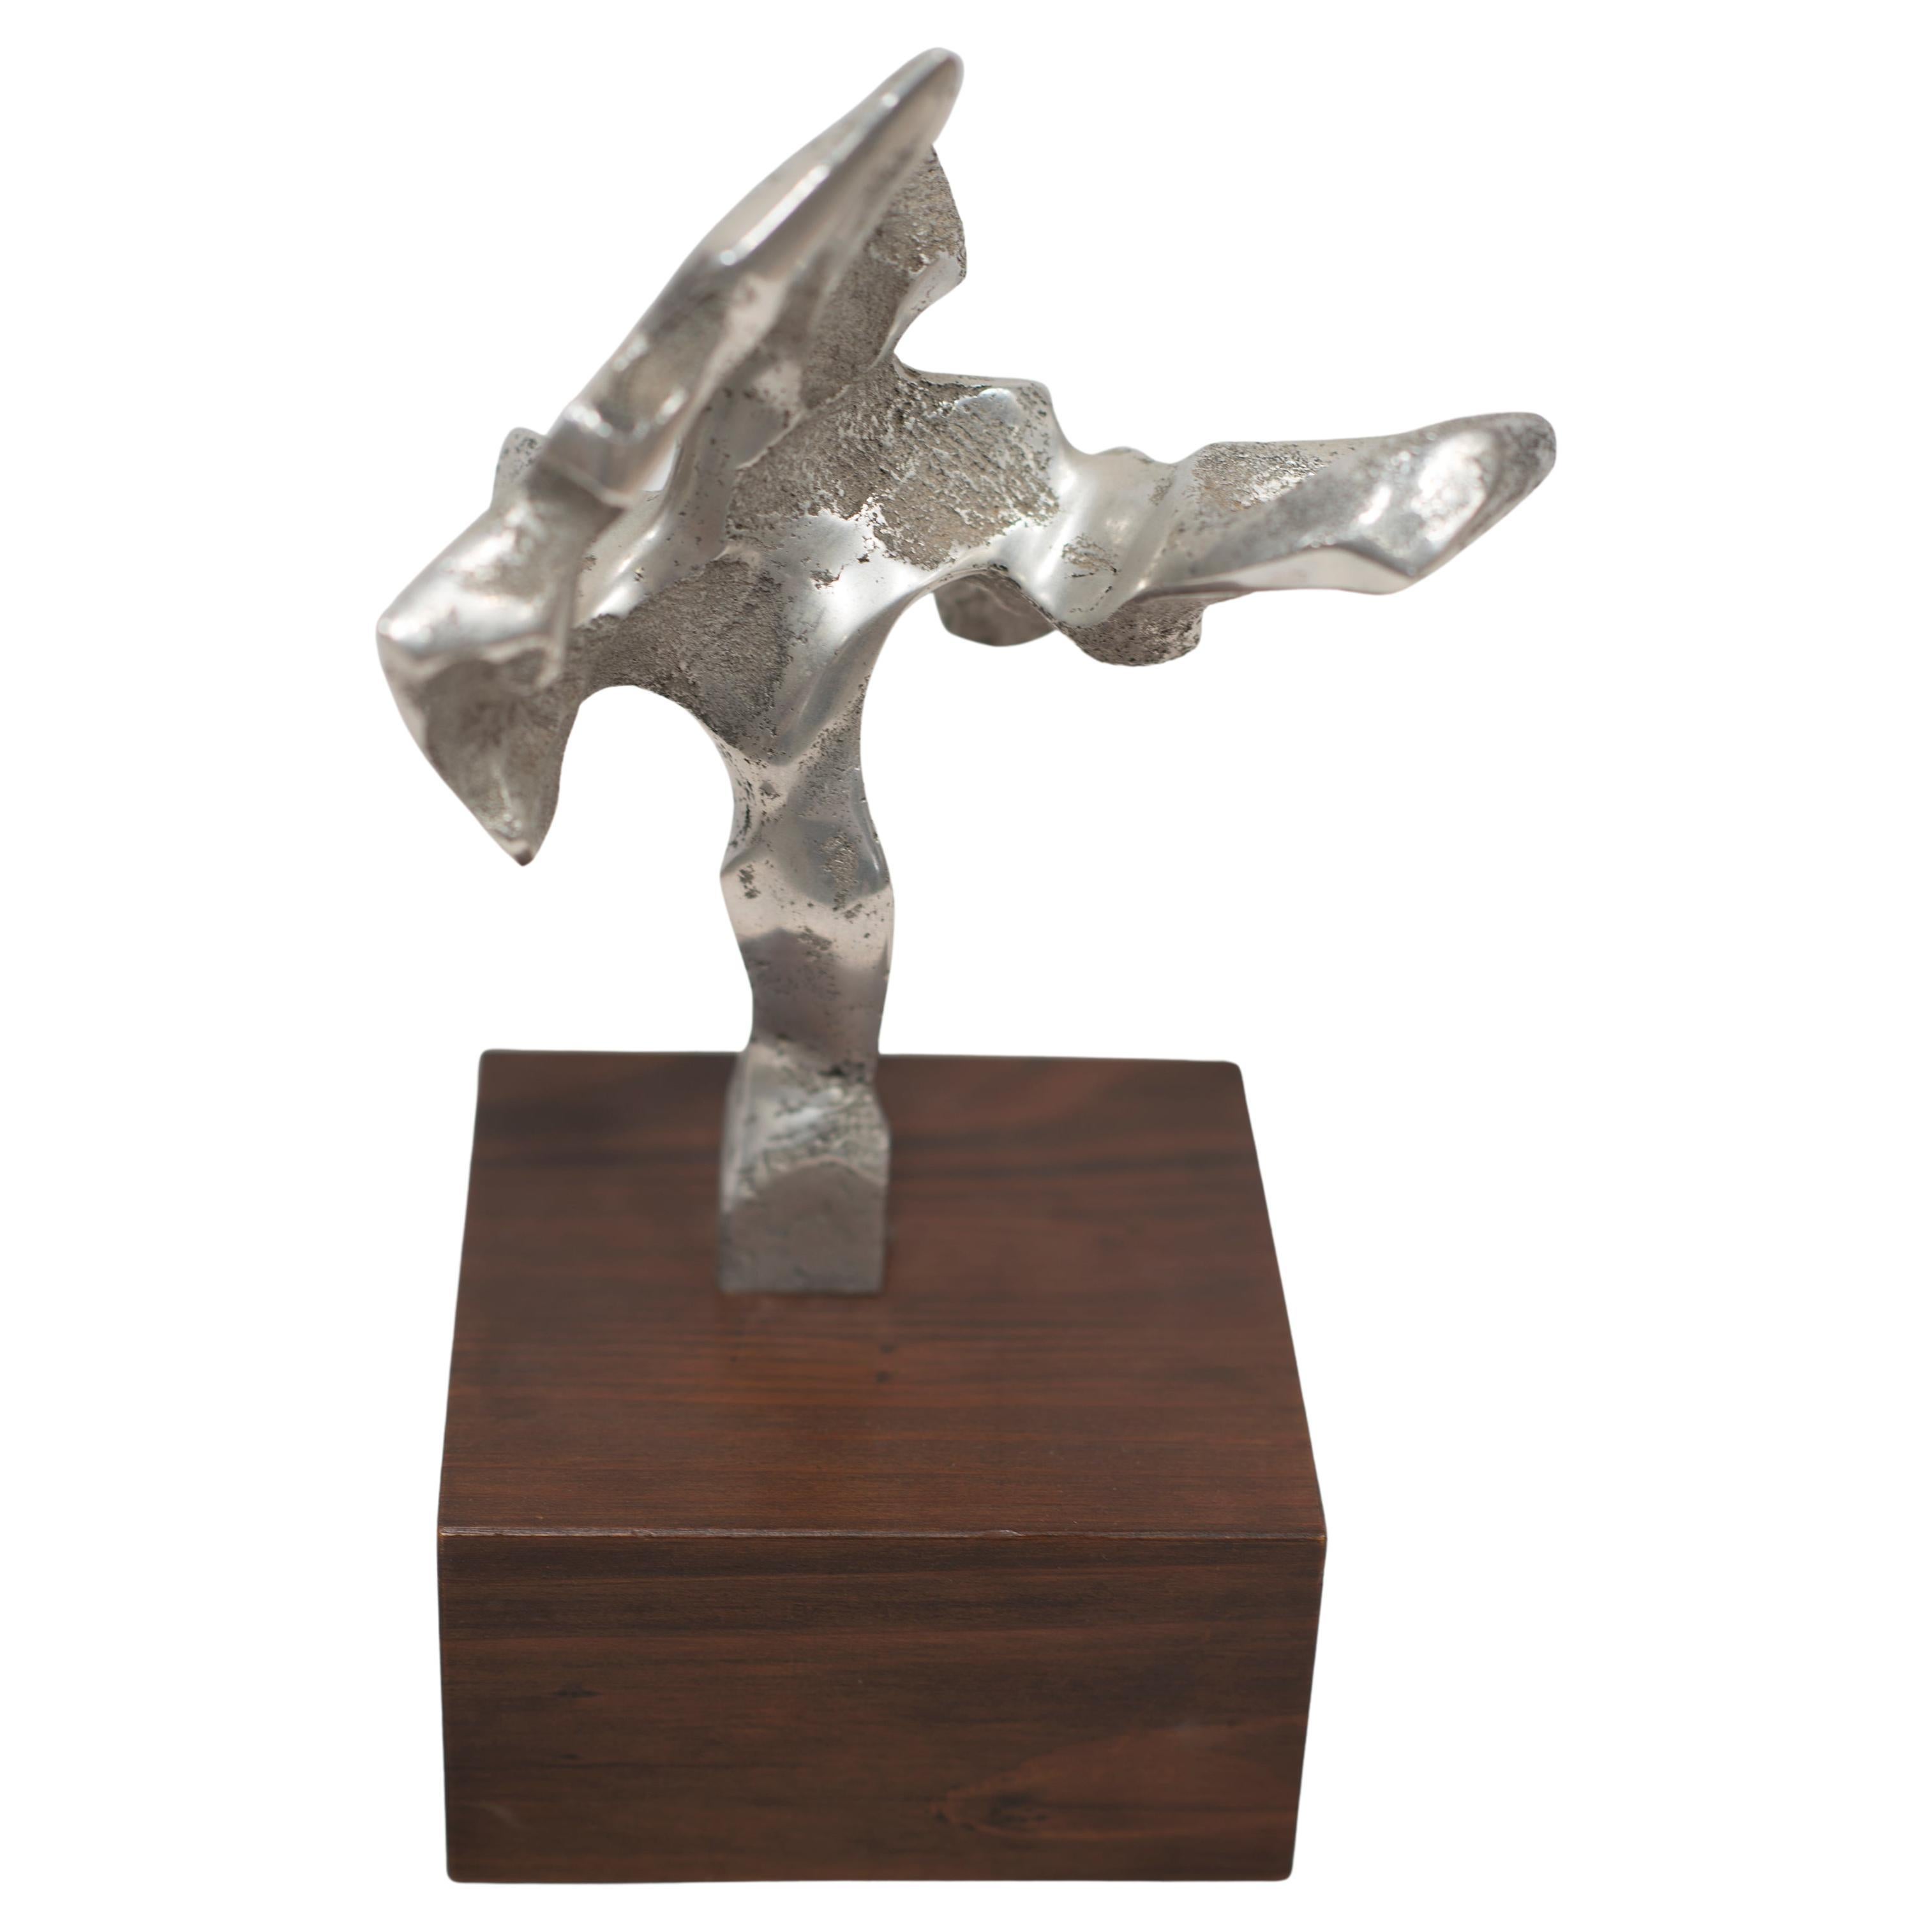 ABSTRACT Metal Sculpture on WALNUT BASE